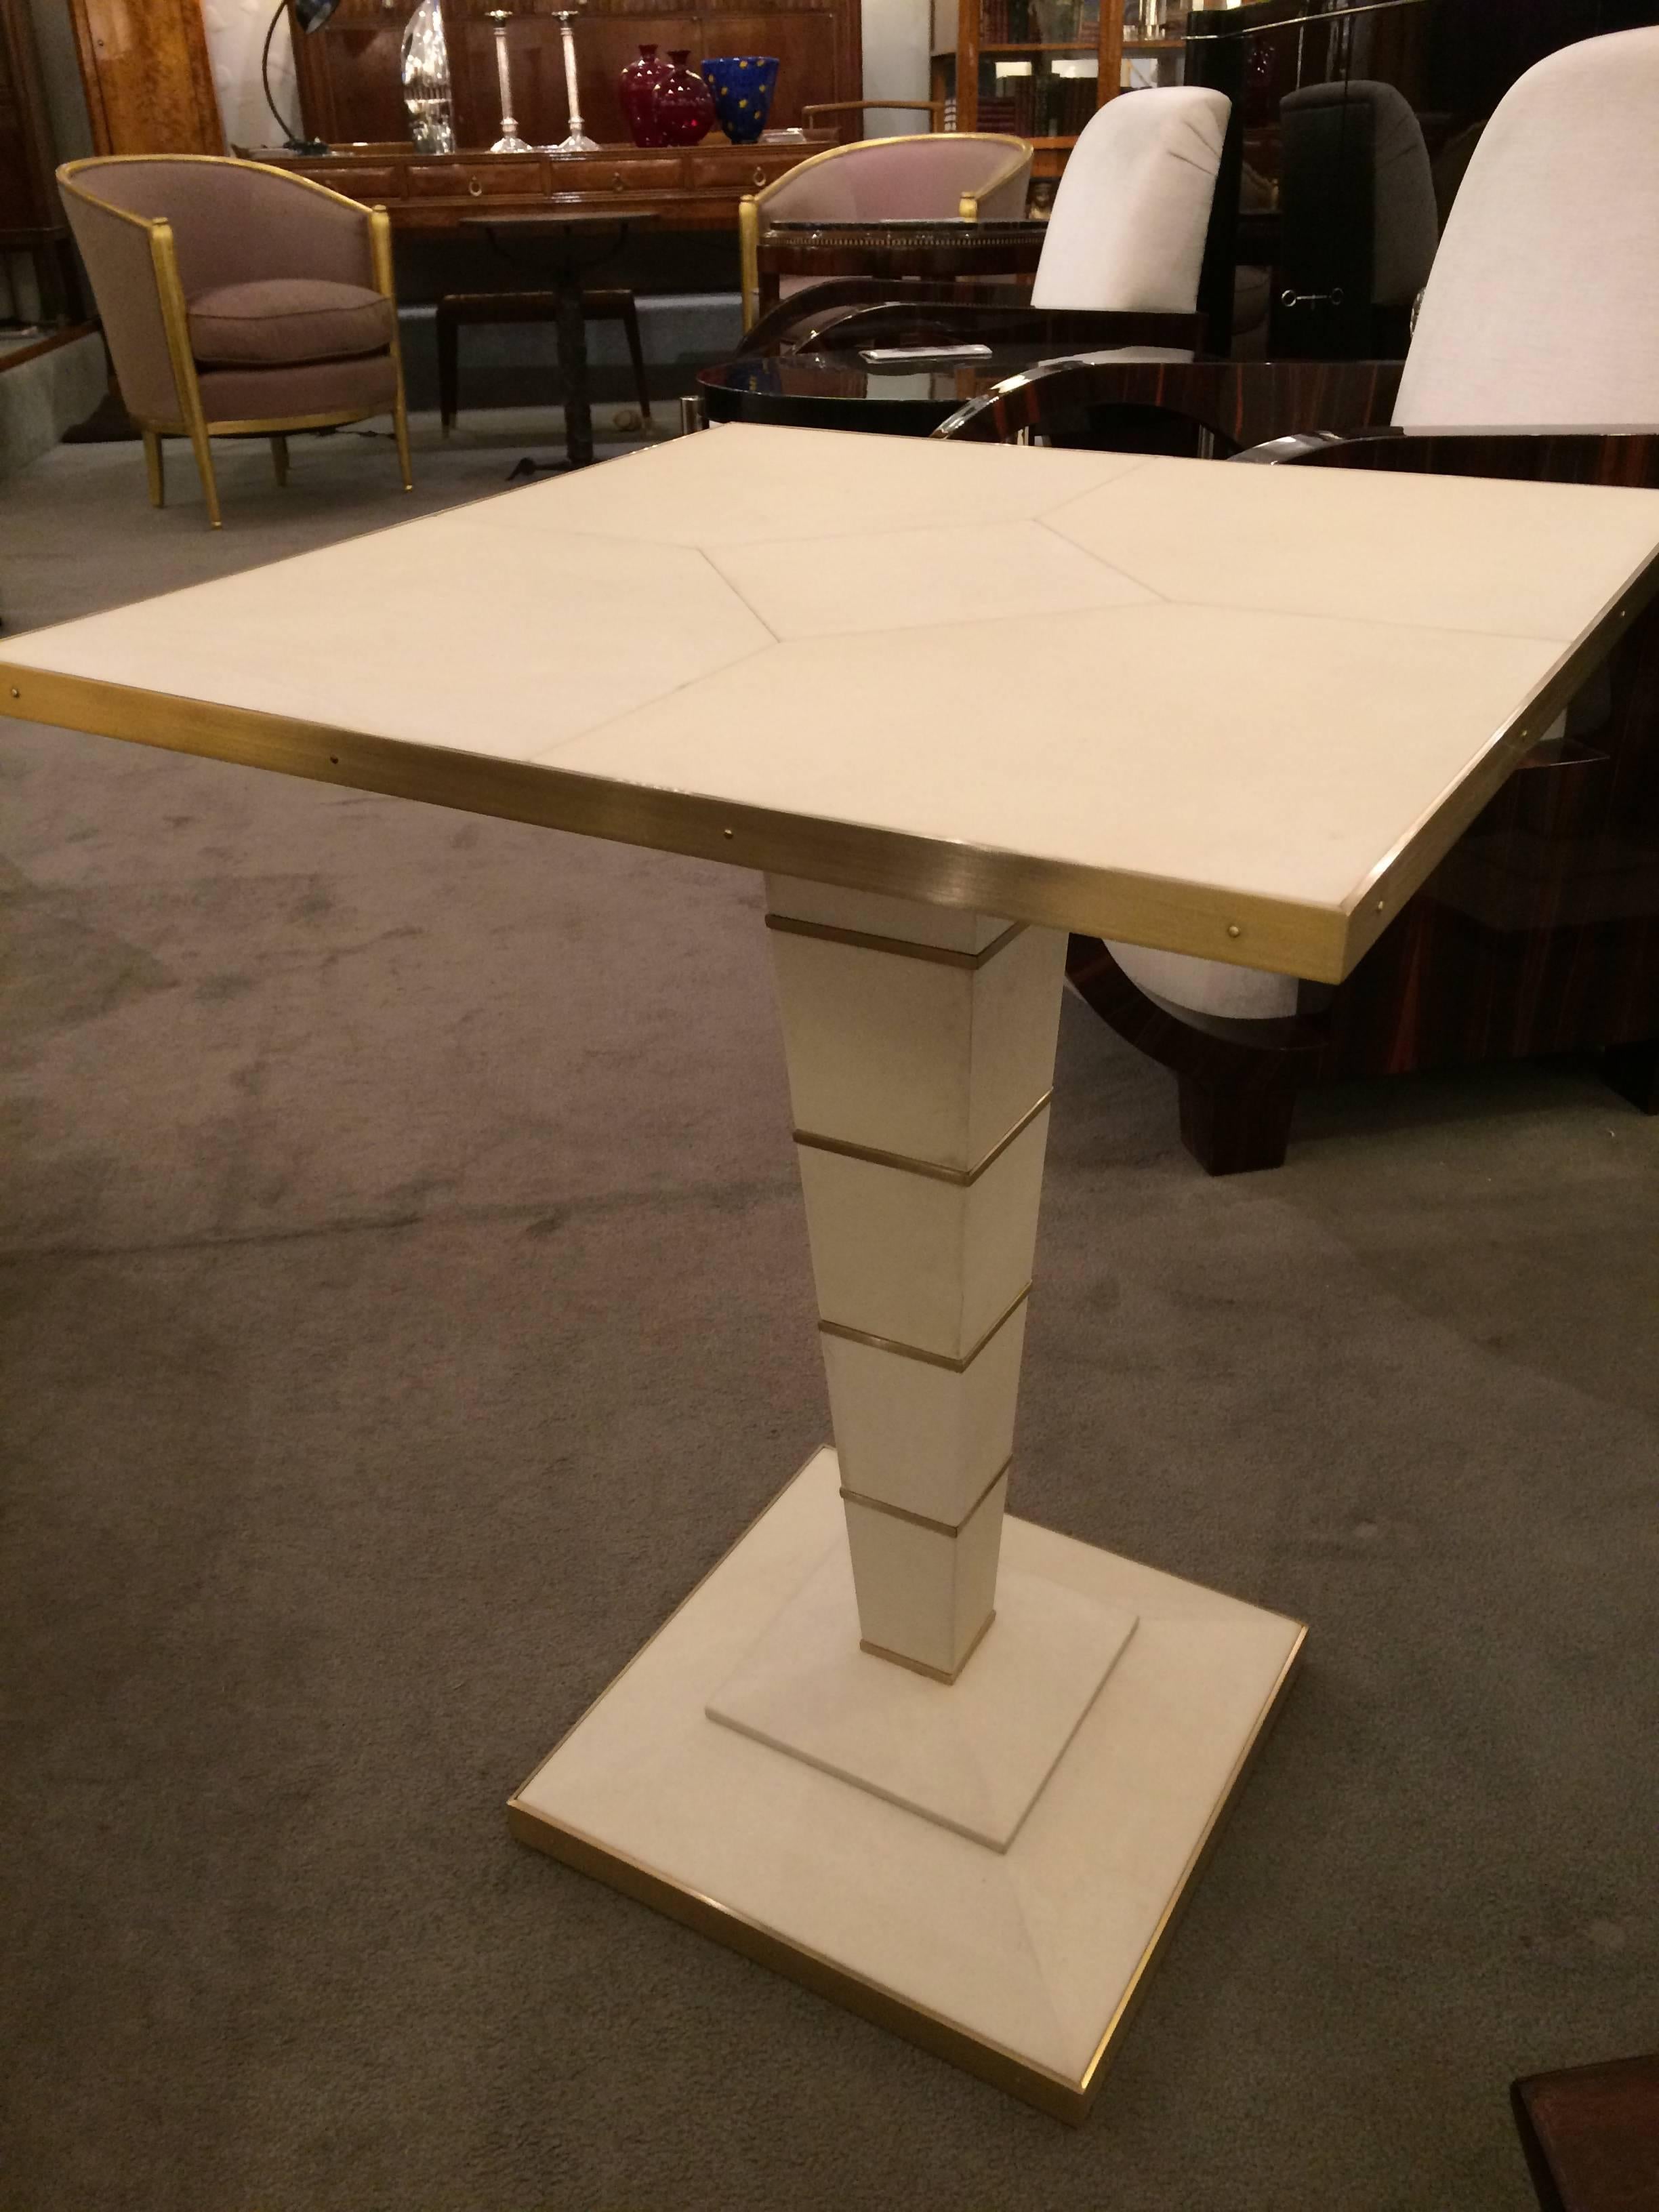 A fine Modernist parchment side table. 
Designed expressly for Karl Kemp Contemporary Collection.
Parchment and patinated brass.
Additional table available.